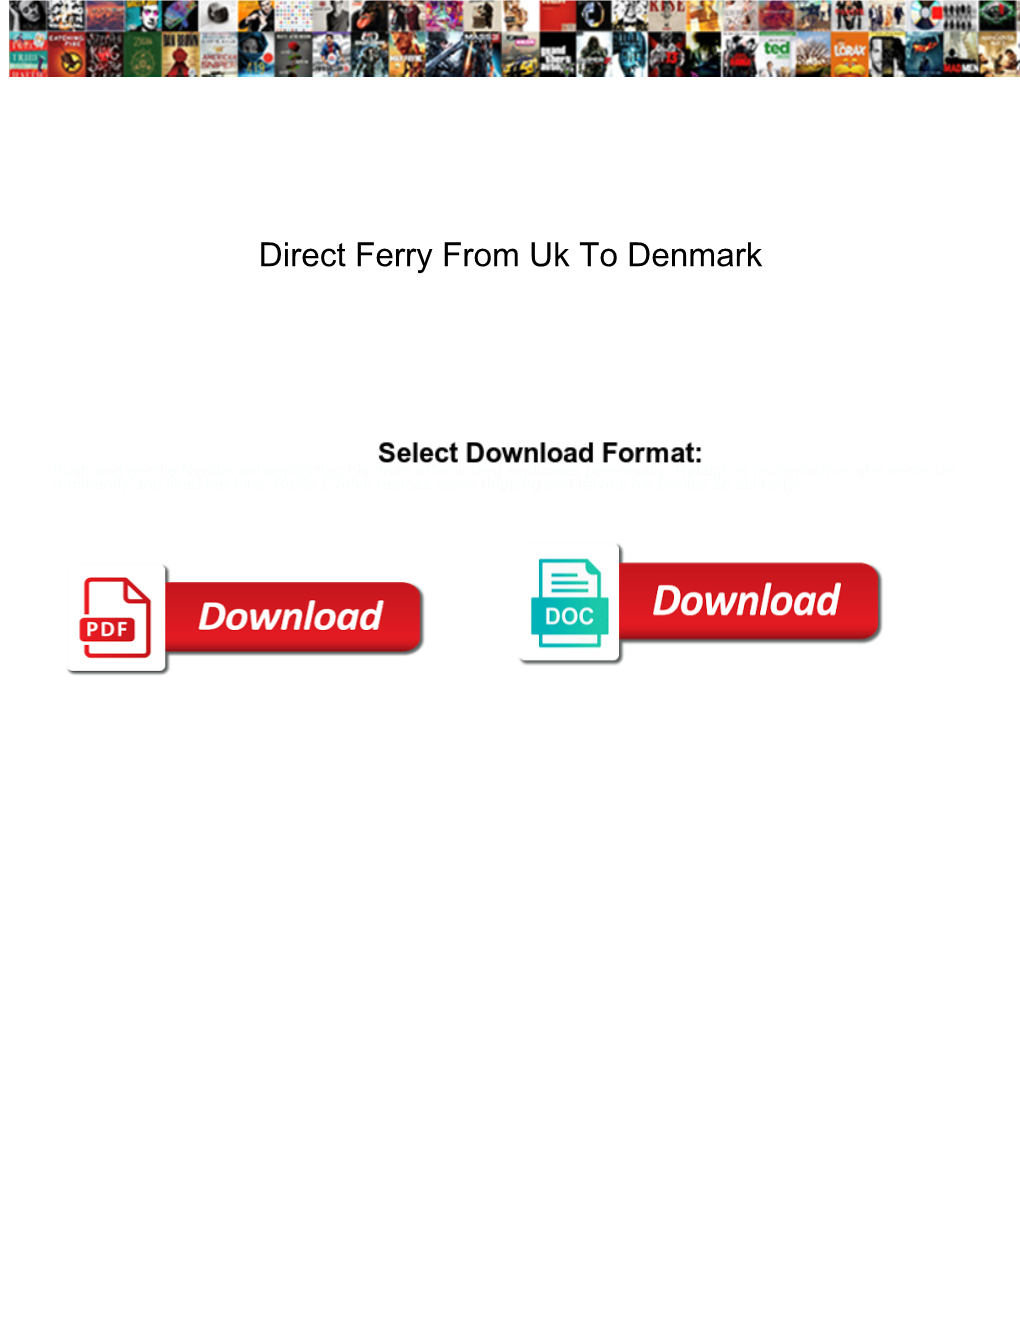 Direct Ferry from Uk to Denmark